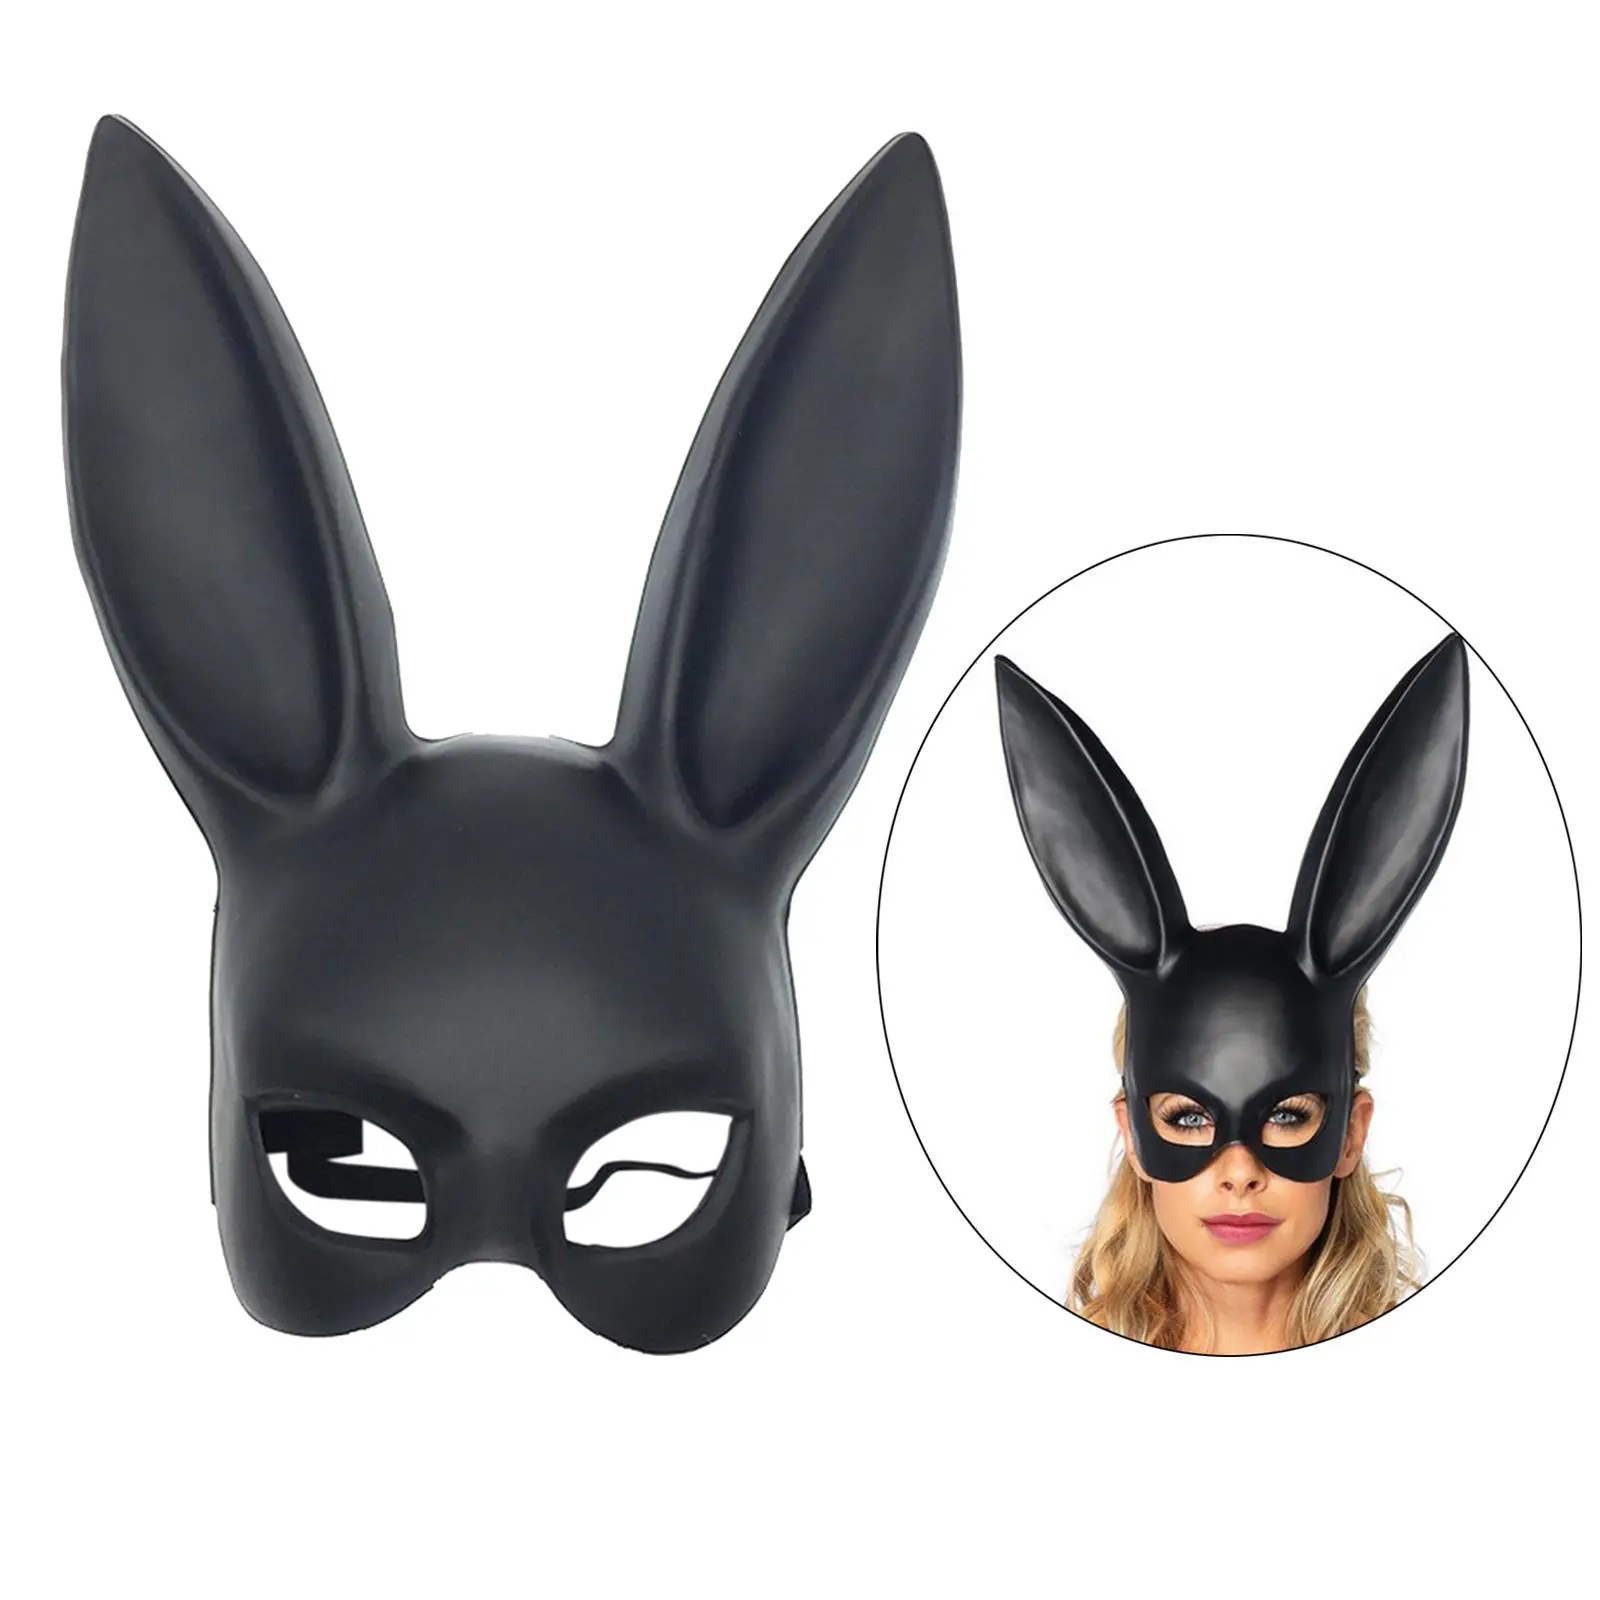 Women Lady Bunny Ear Rabbit Mask Dress Cosplay Masquerade Easter Halloween Theatrical Performance Props Facecover Animal Masks